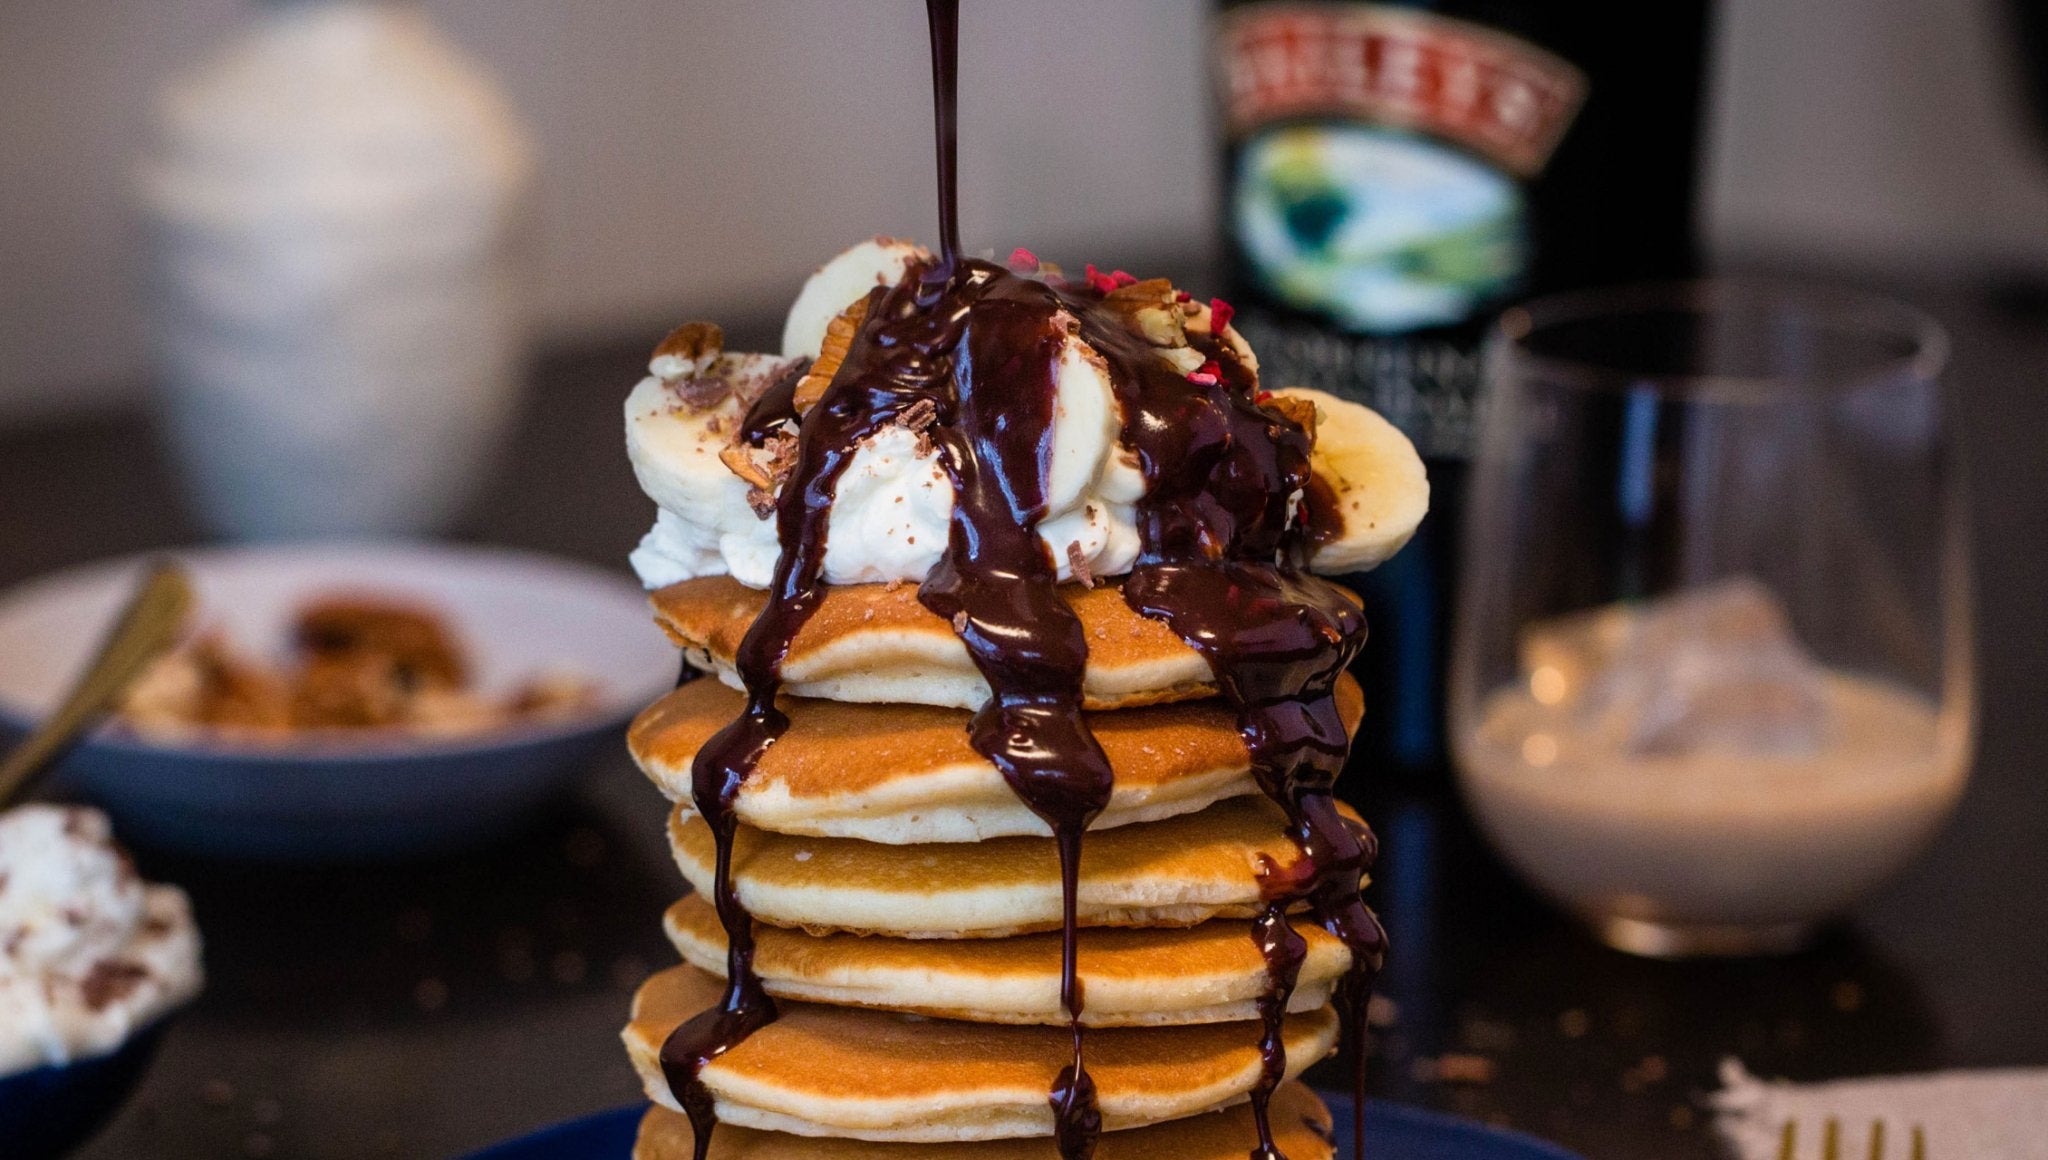 How-to-Make-Baileys-Chocolate-Pancakes-With-Hot-Fudge-Sauce The Bottle Club